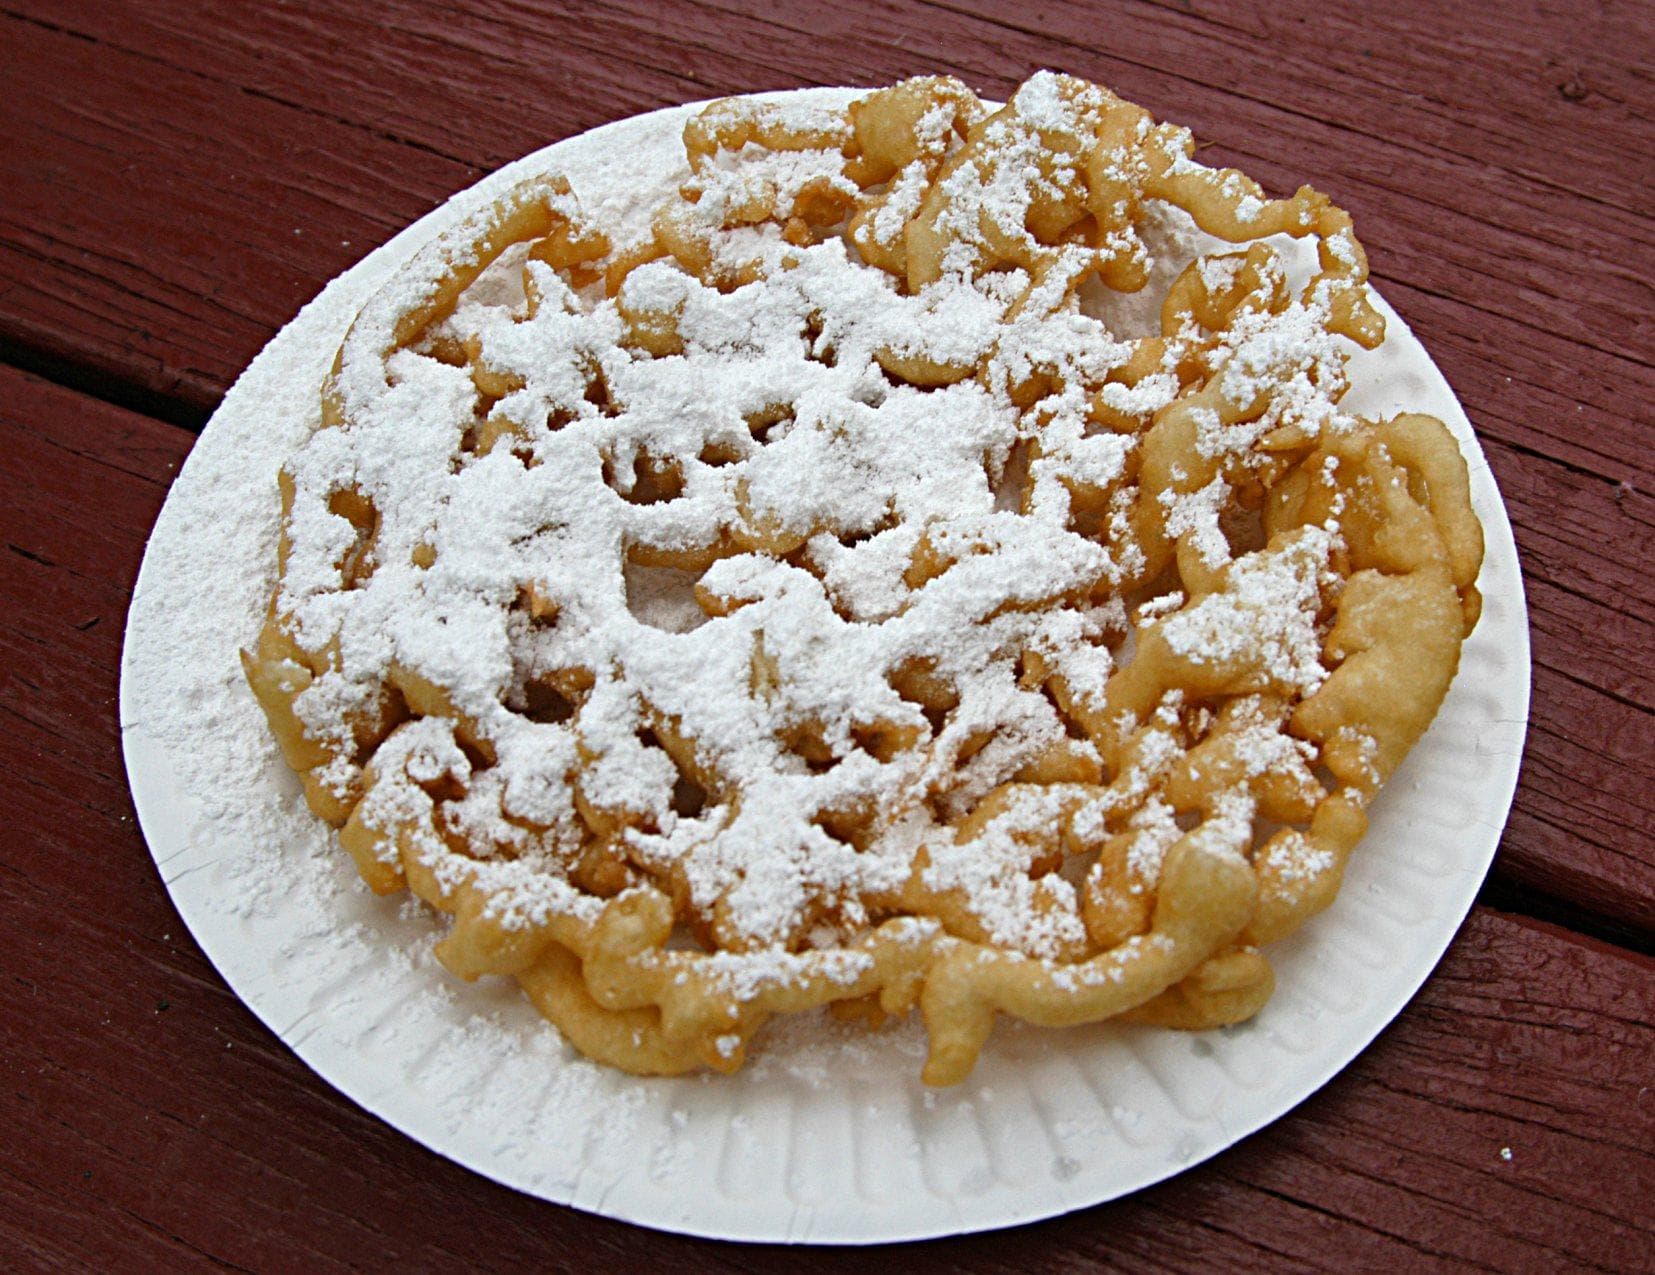 Funnel cake on Random Most Delicious Foods to Dunk of Deep Fry